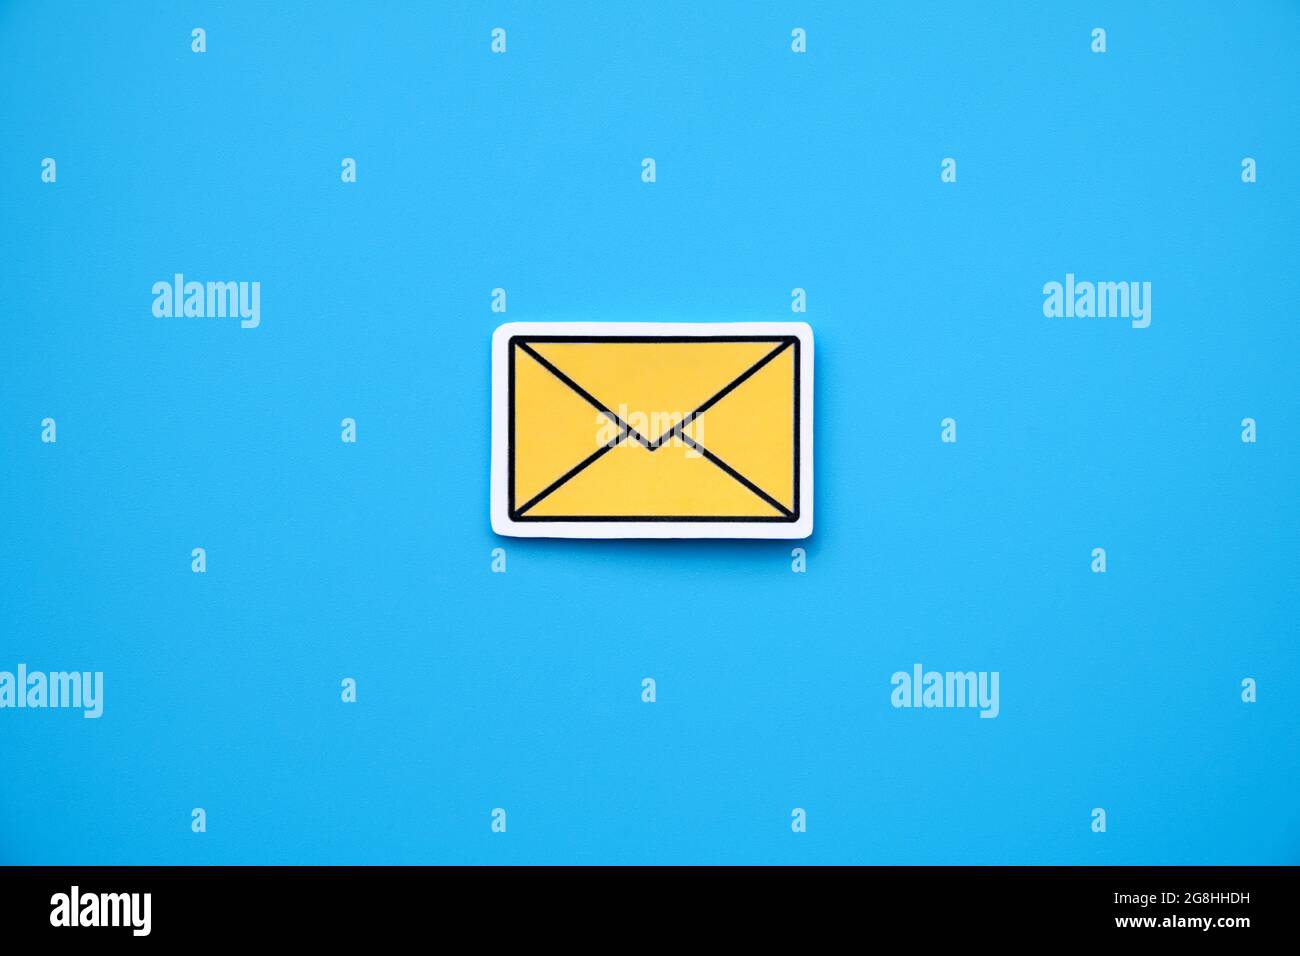 Yellow message sign or envelope icon against a blue background Stock Photo